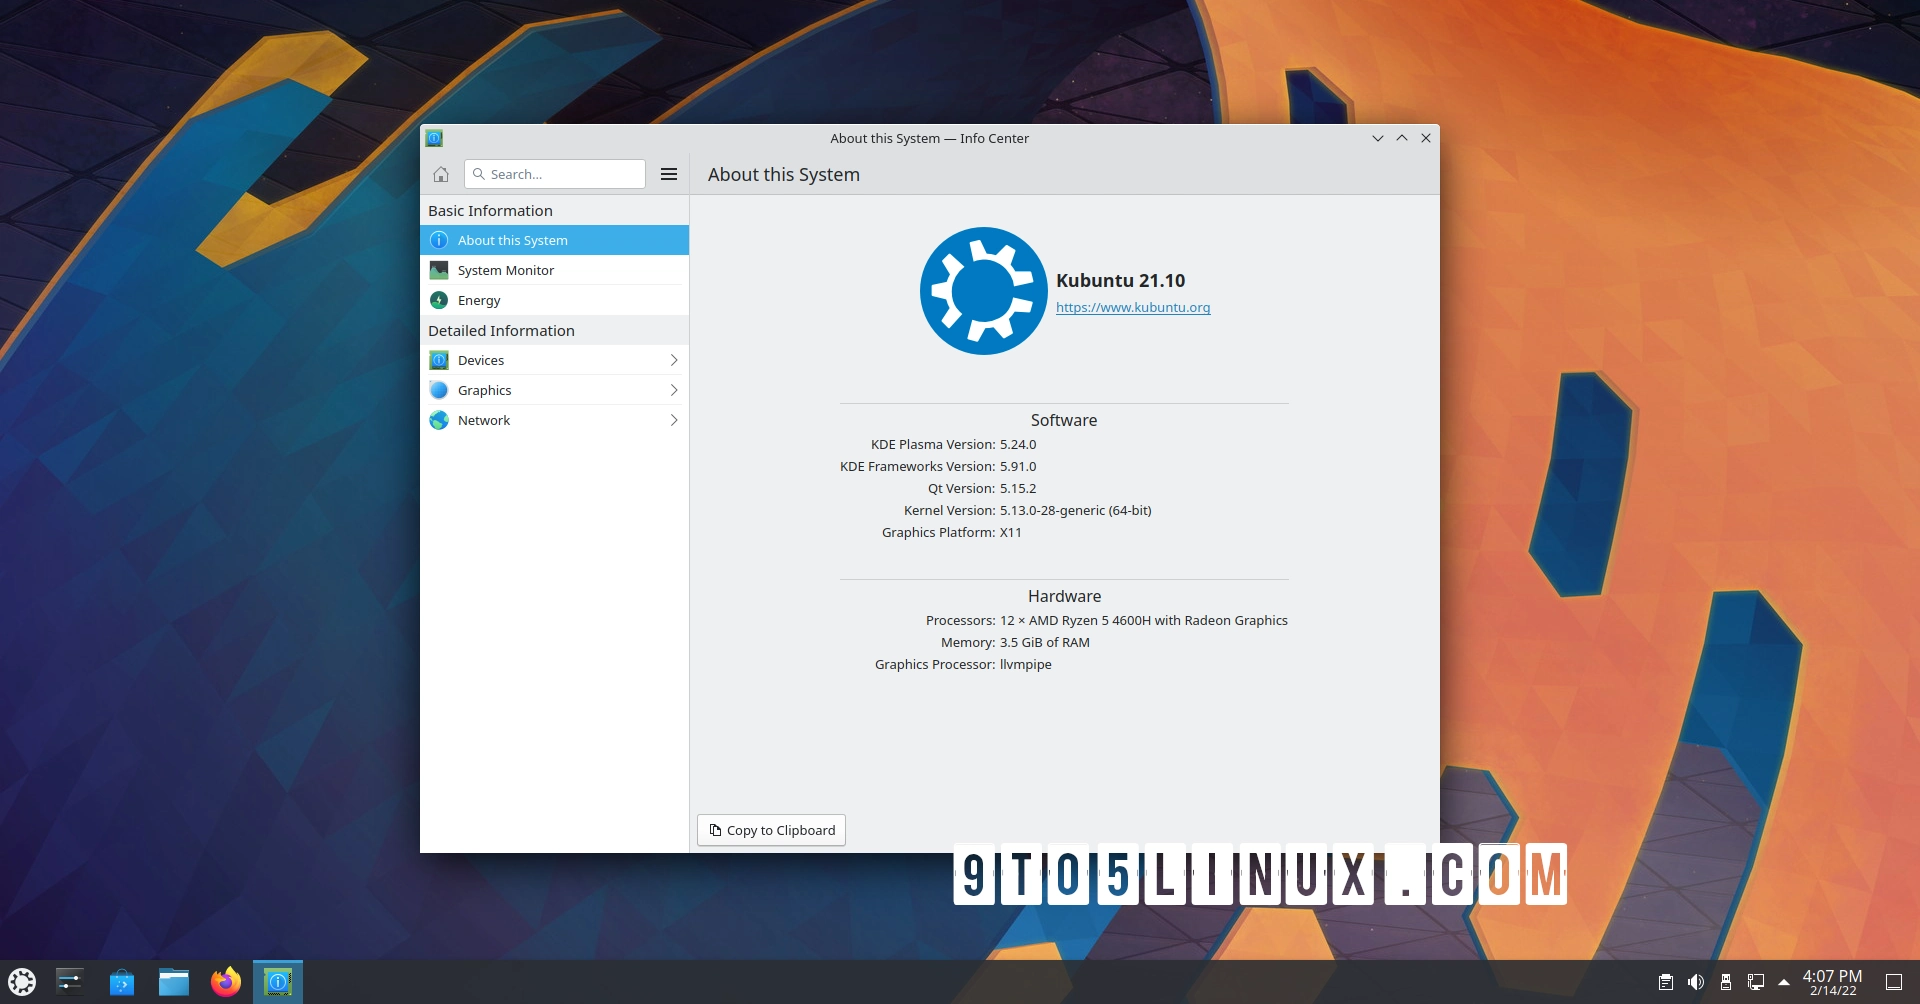 You Can Now Install KDE Plasma 5.24 LTS on Kubuntu 21.10, Here’s How